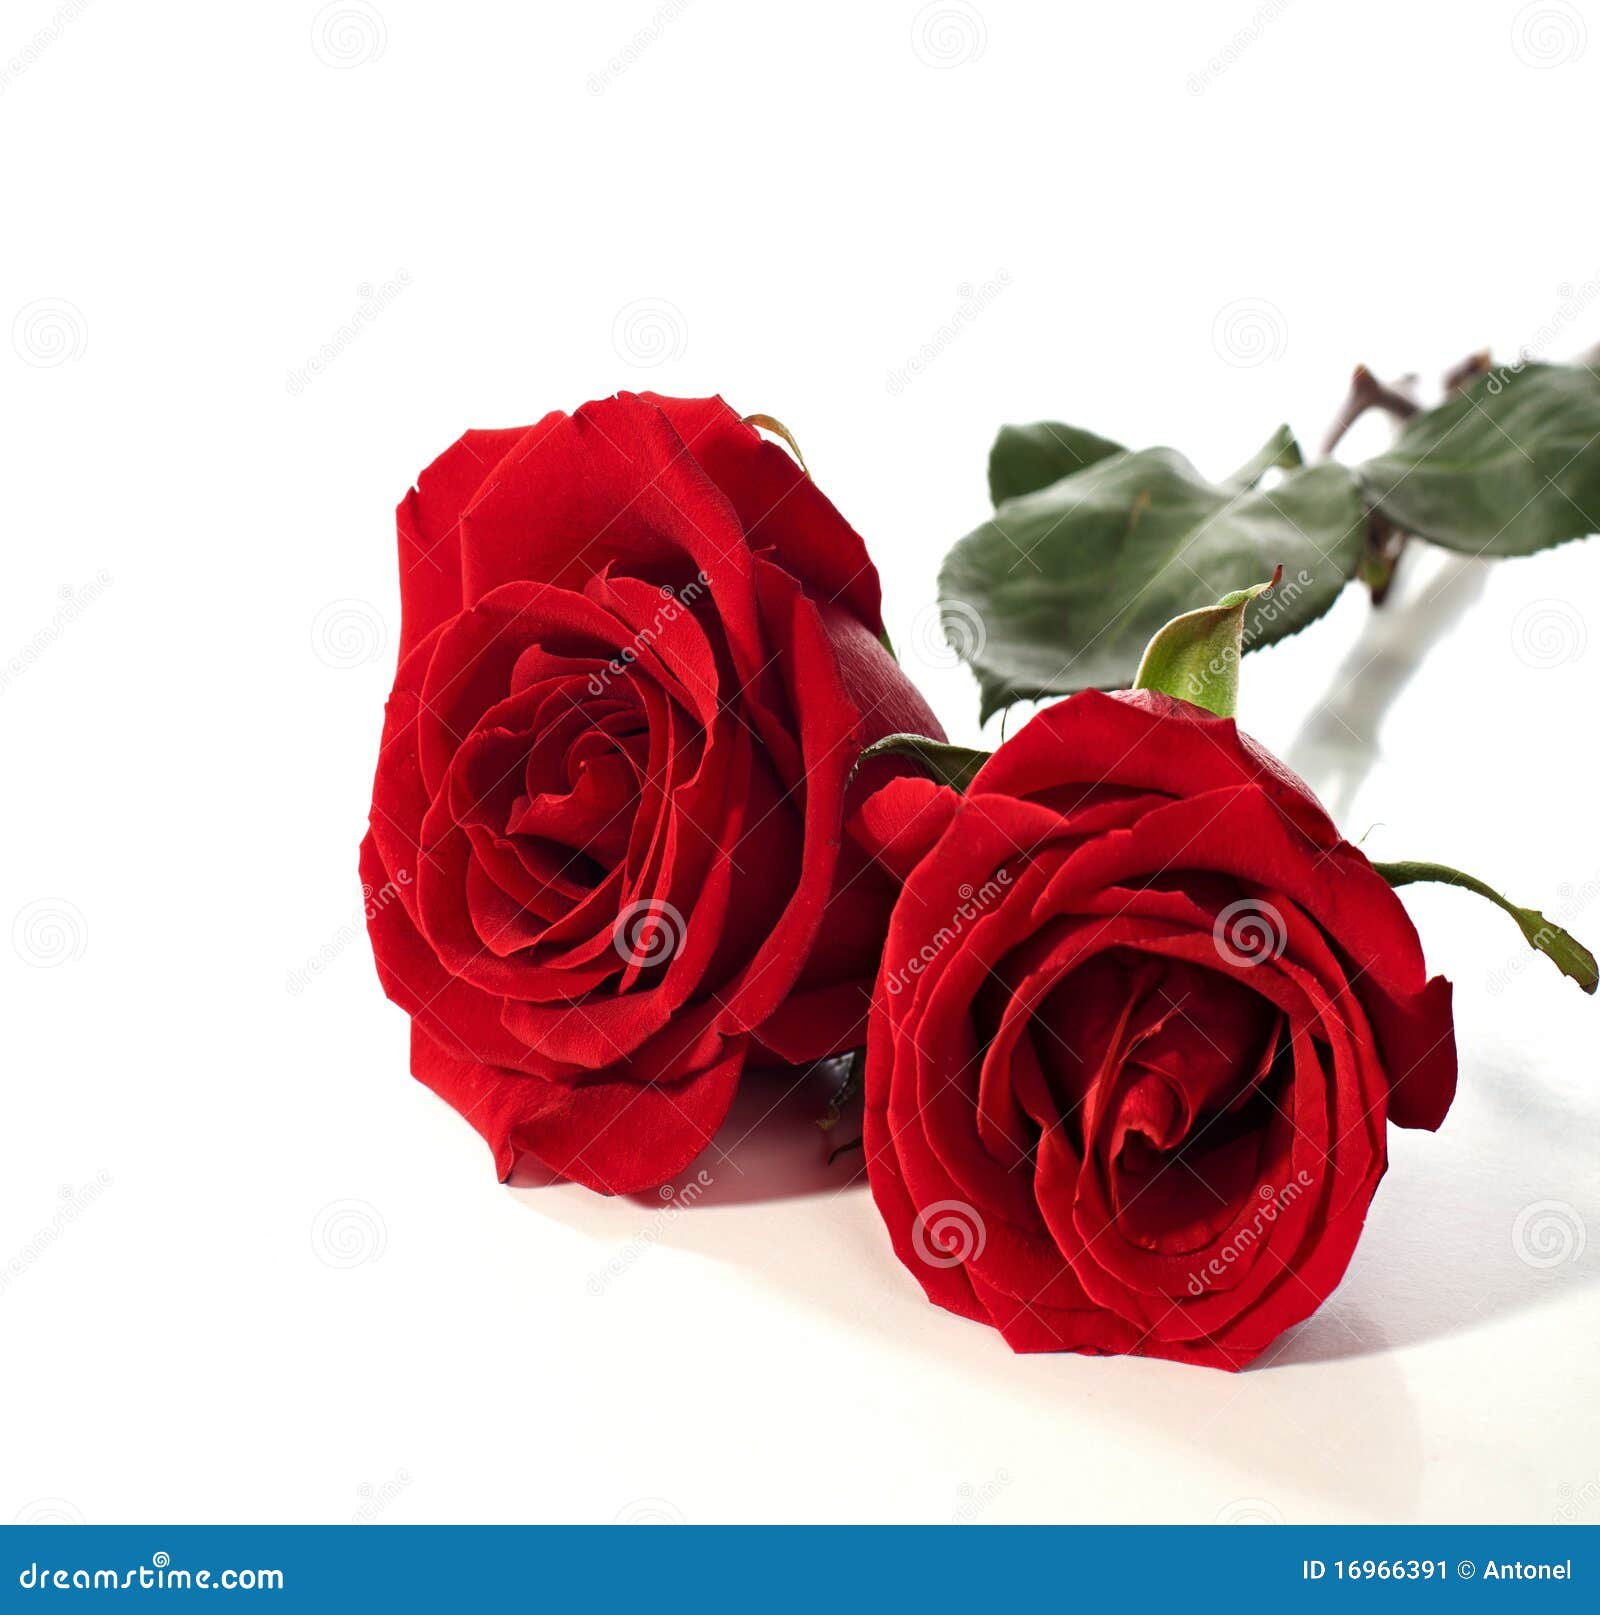 Two red roses stock image. Image of present, blossom - 16966391